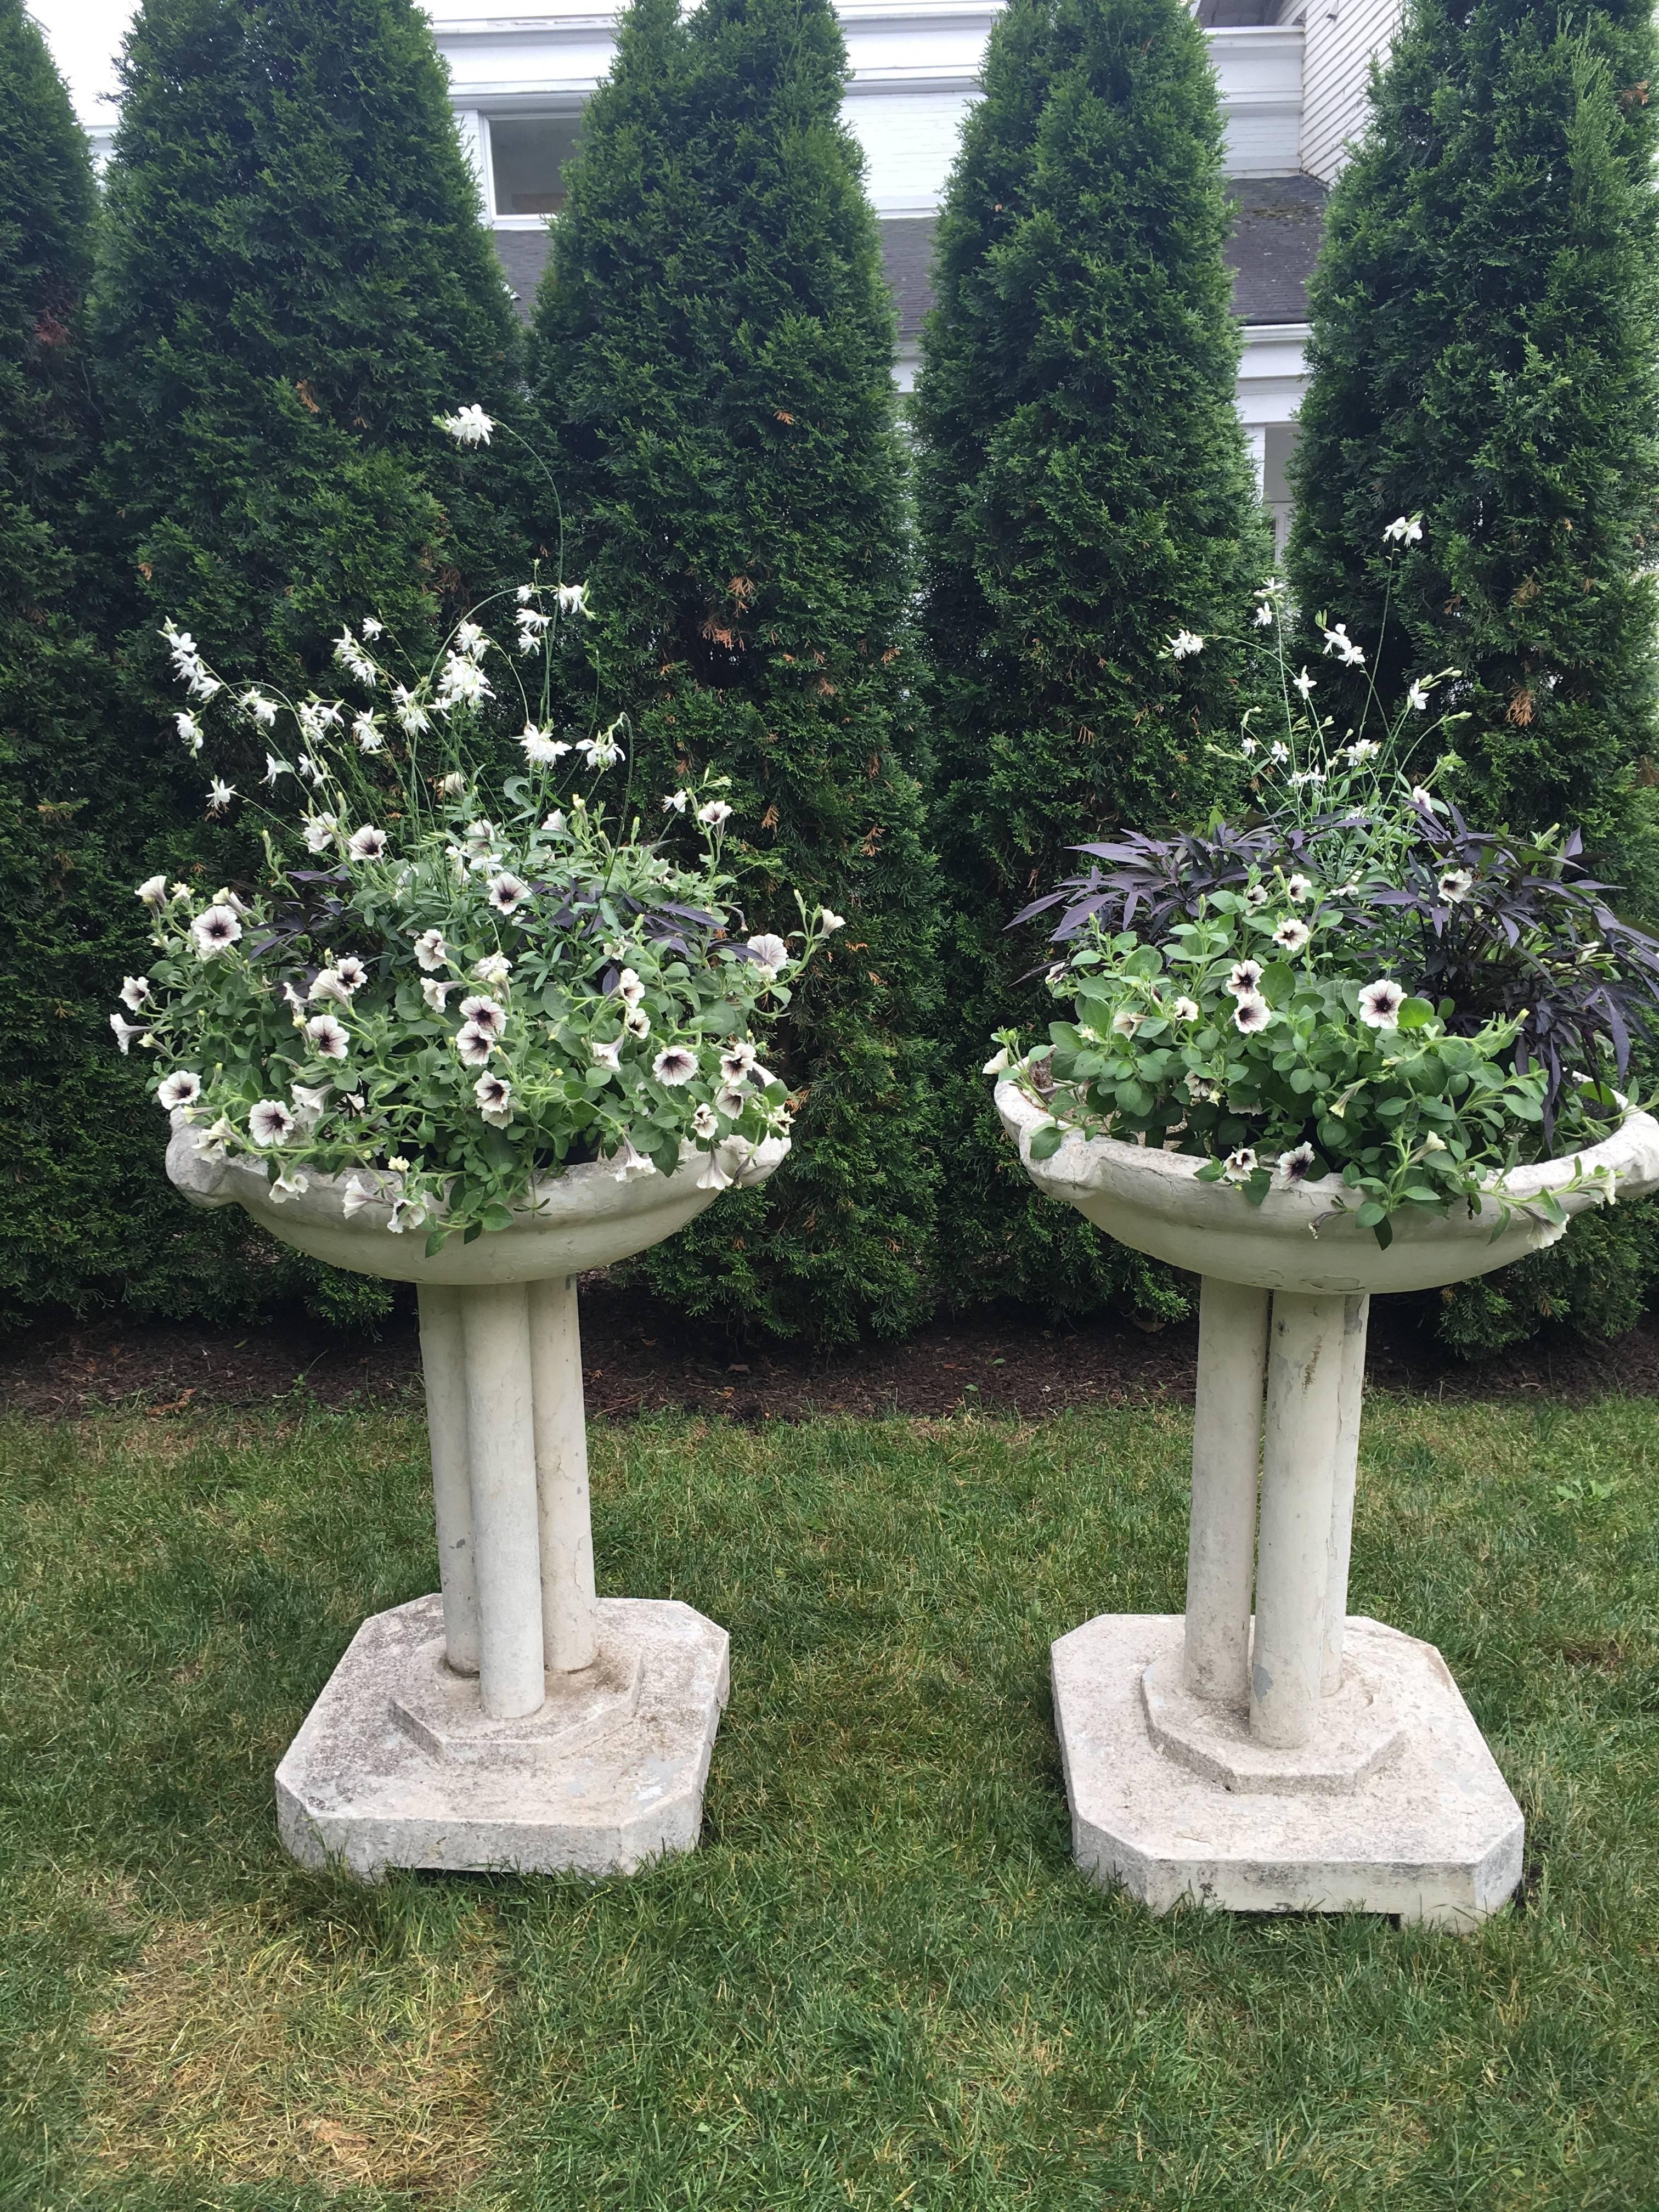 This cast stone font has it all! Worn pale cream-colored paint, mossy edges, good depth, stunning form, and great presence. Its superb height makes it a prime candidate for a focal point in your garden or on the terrace. With great versatility, it